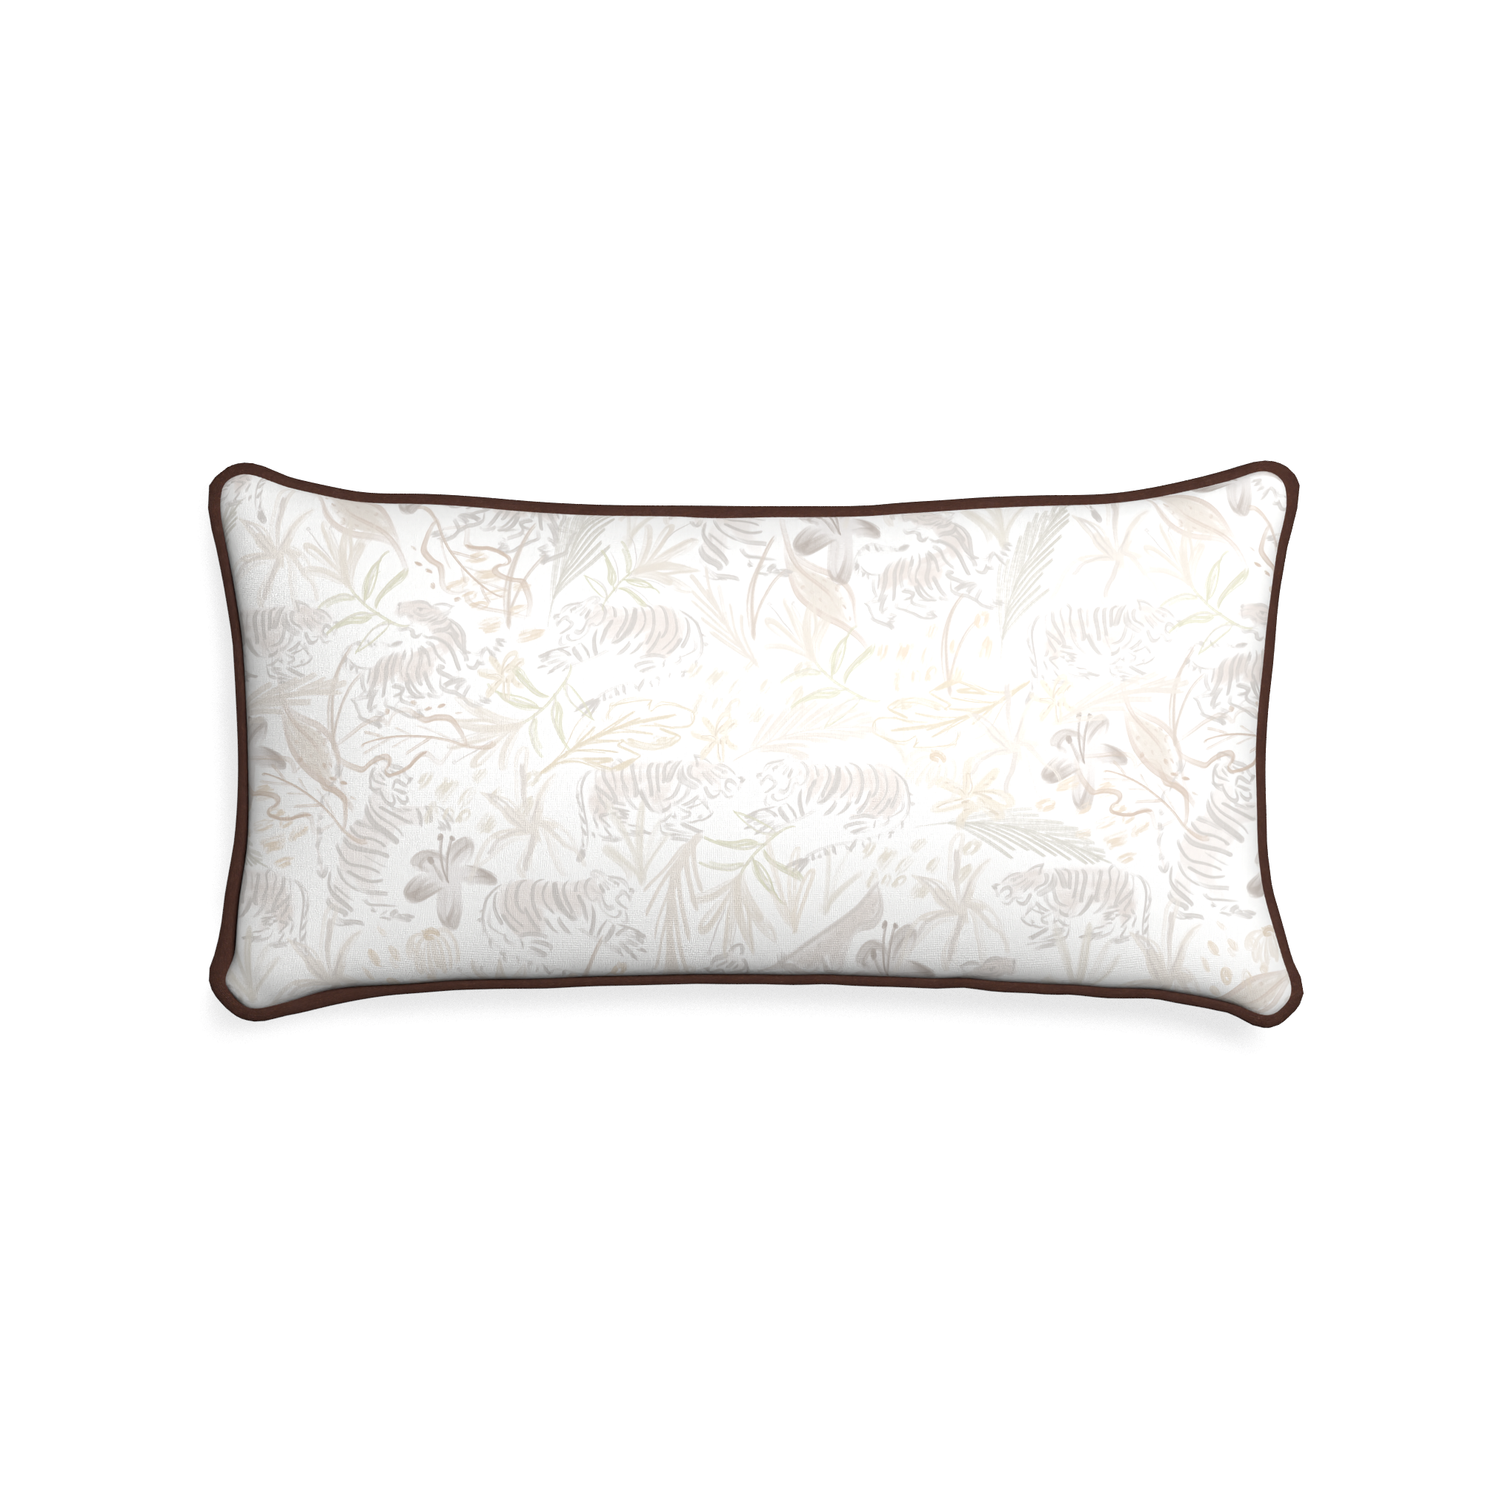 Midi-lumbar frida sand custom beige chinoiserie tigerpillow with w piping on white background